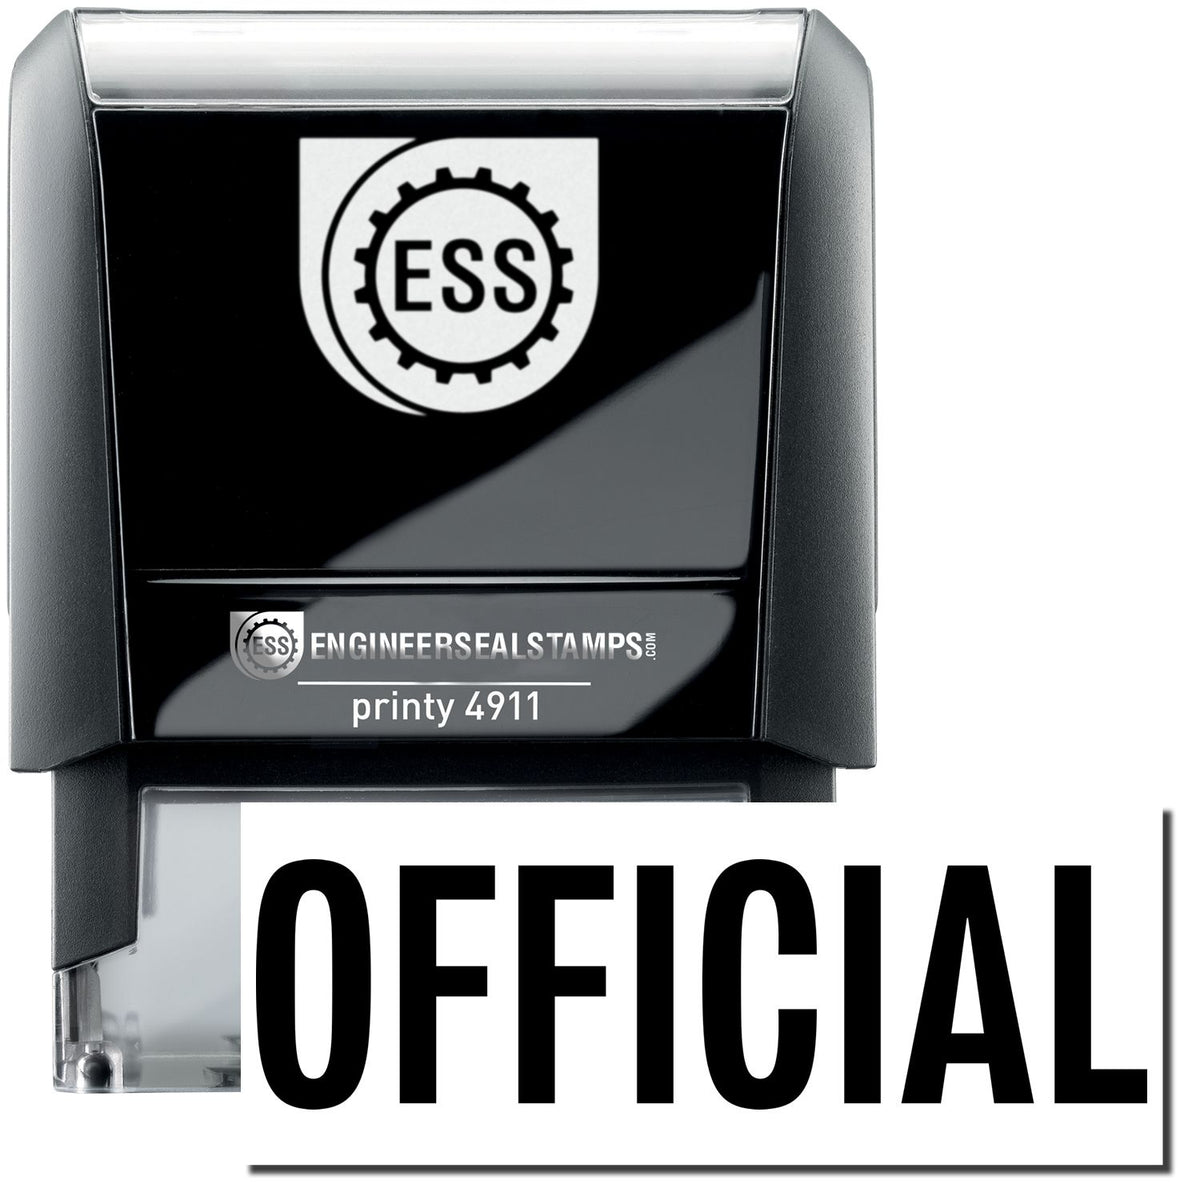 A self-inking stamp with a stamped image showing how the text &quot;OFFICIAL&quot; is displayed after stamping.